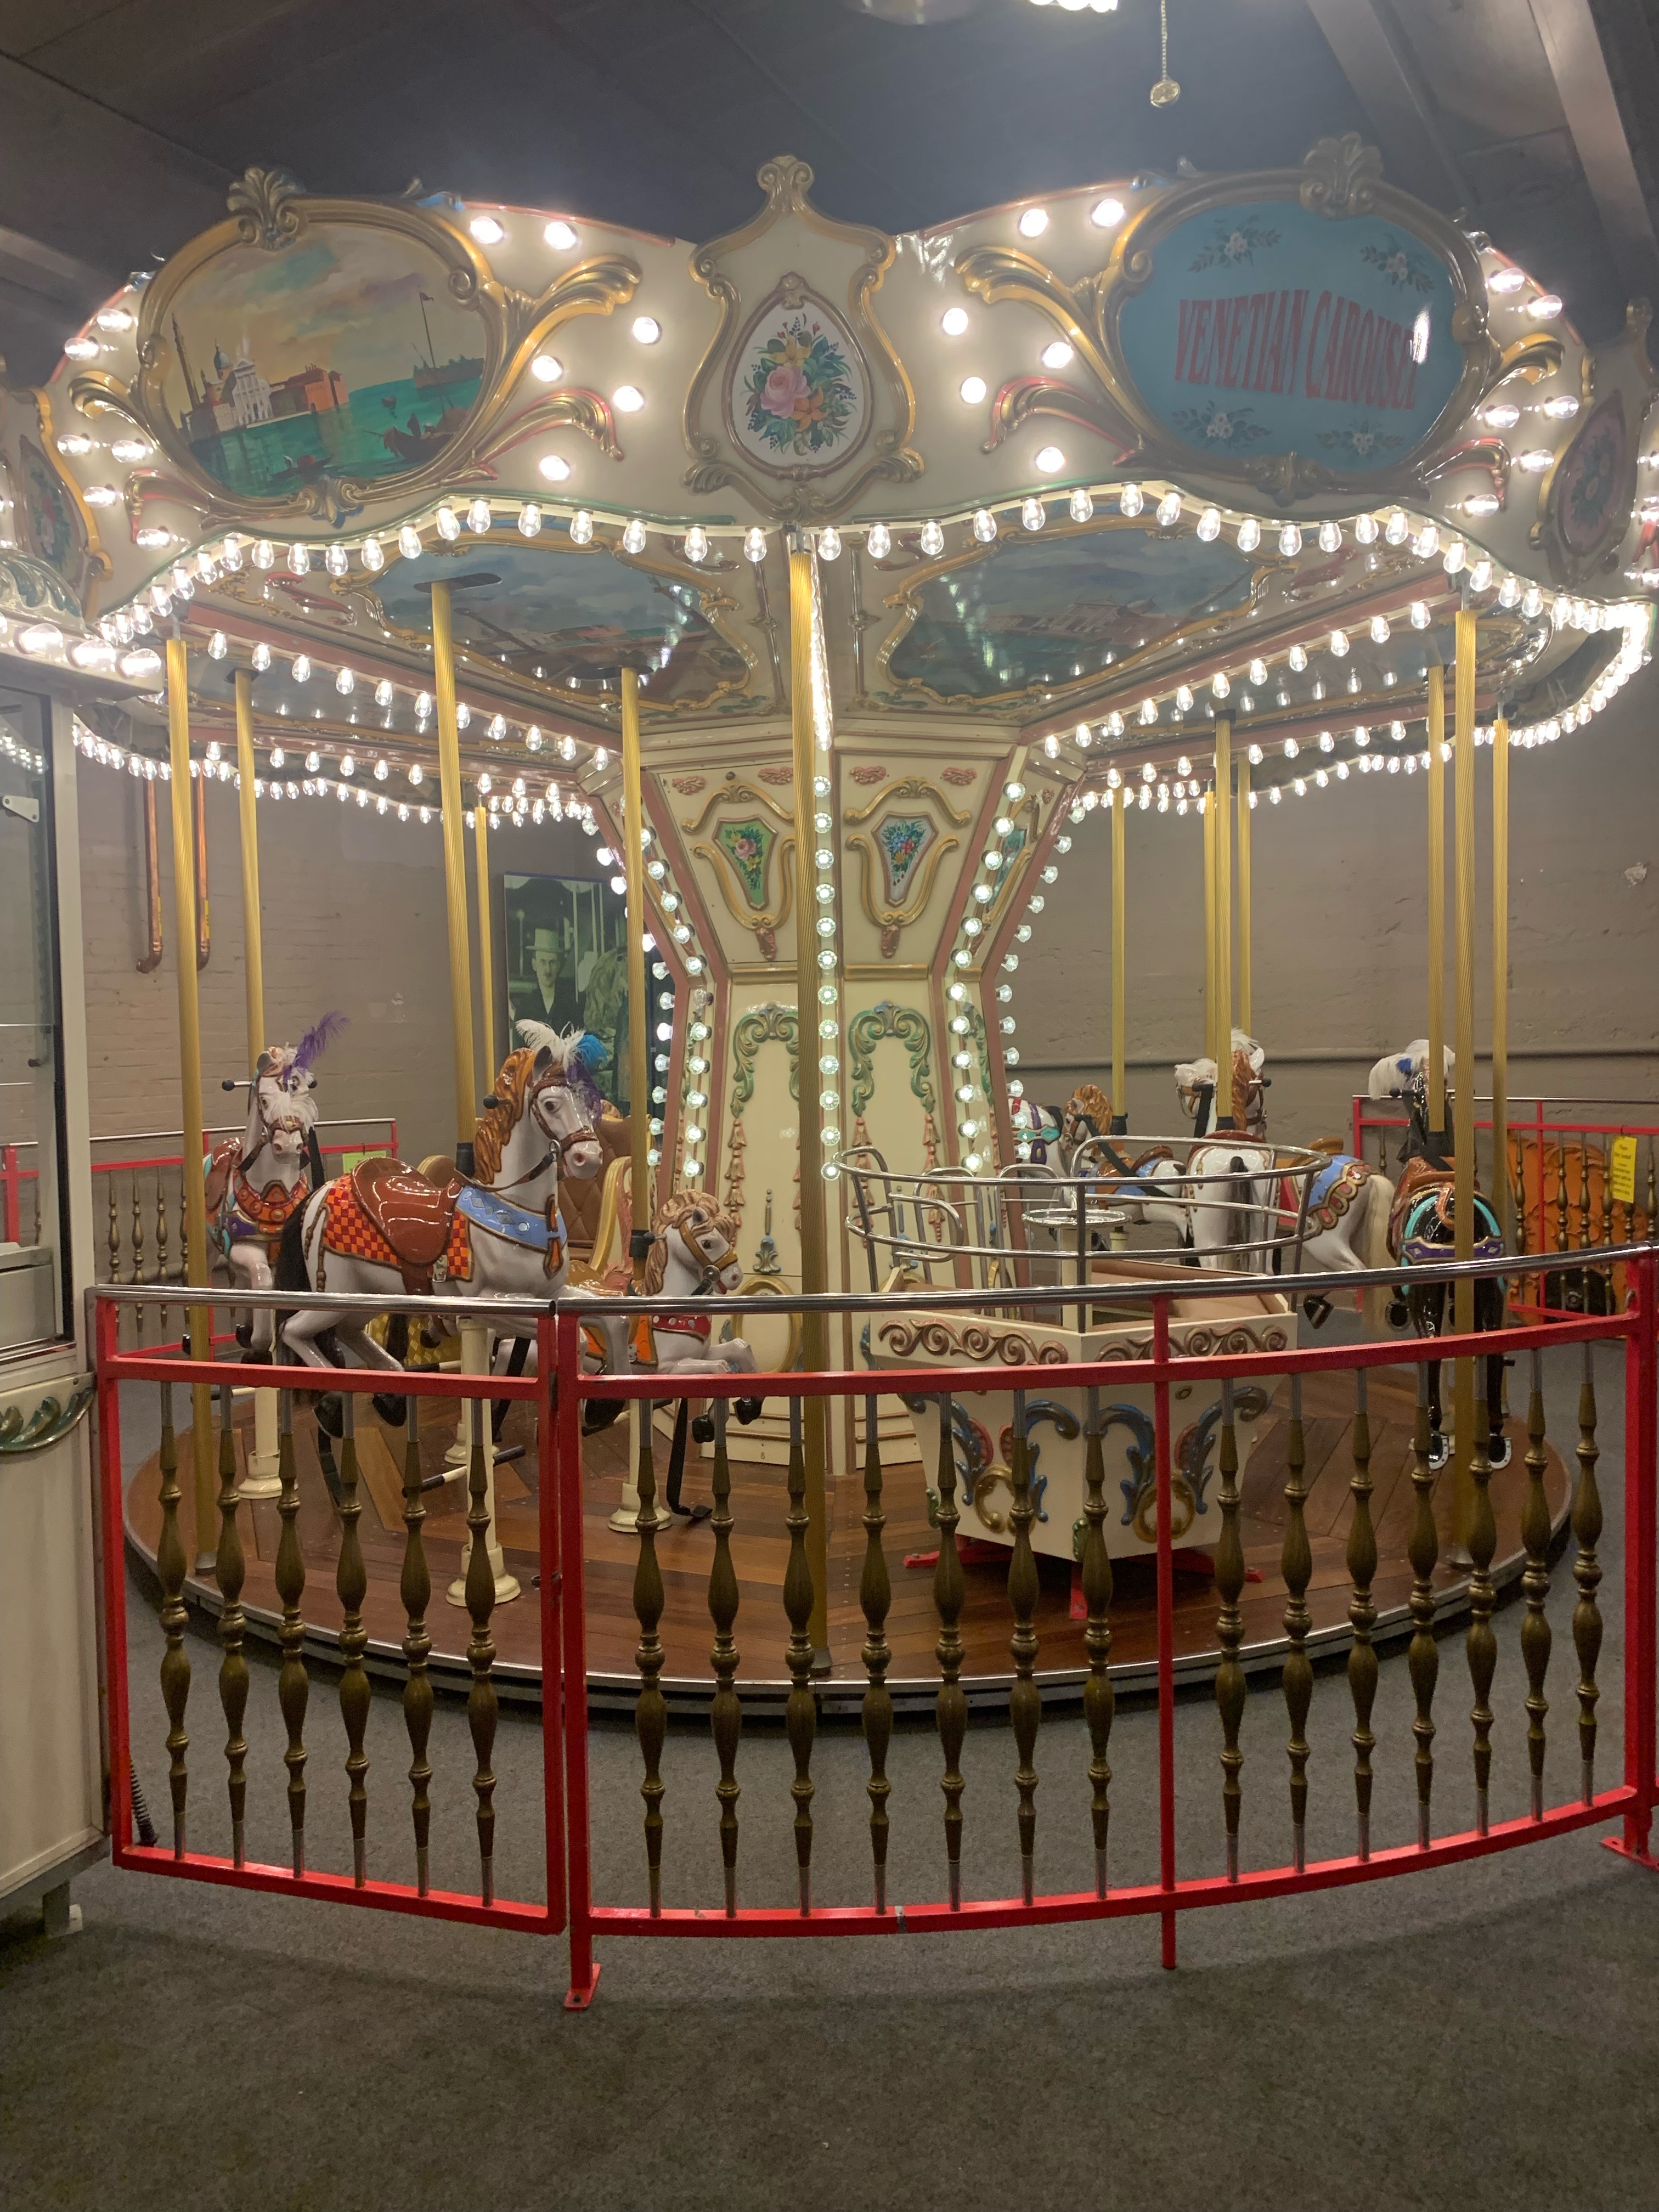 Yes, this carousel is inside the New England Carousel Museum and customers can ride it.  Yay!